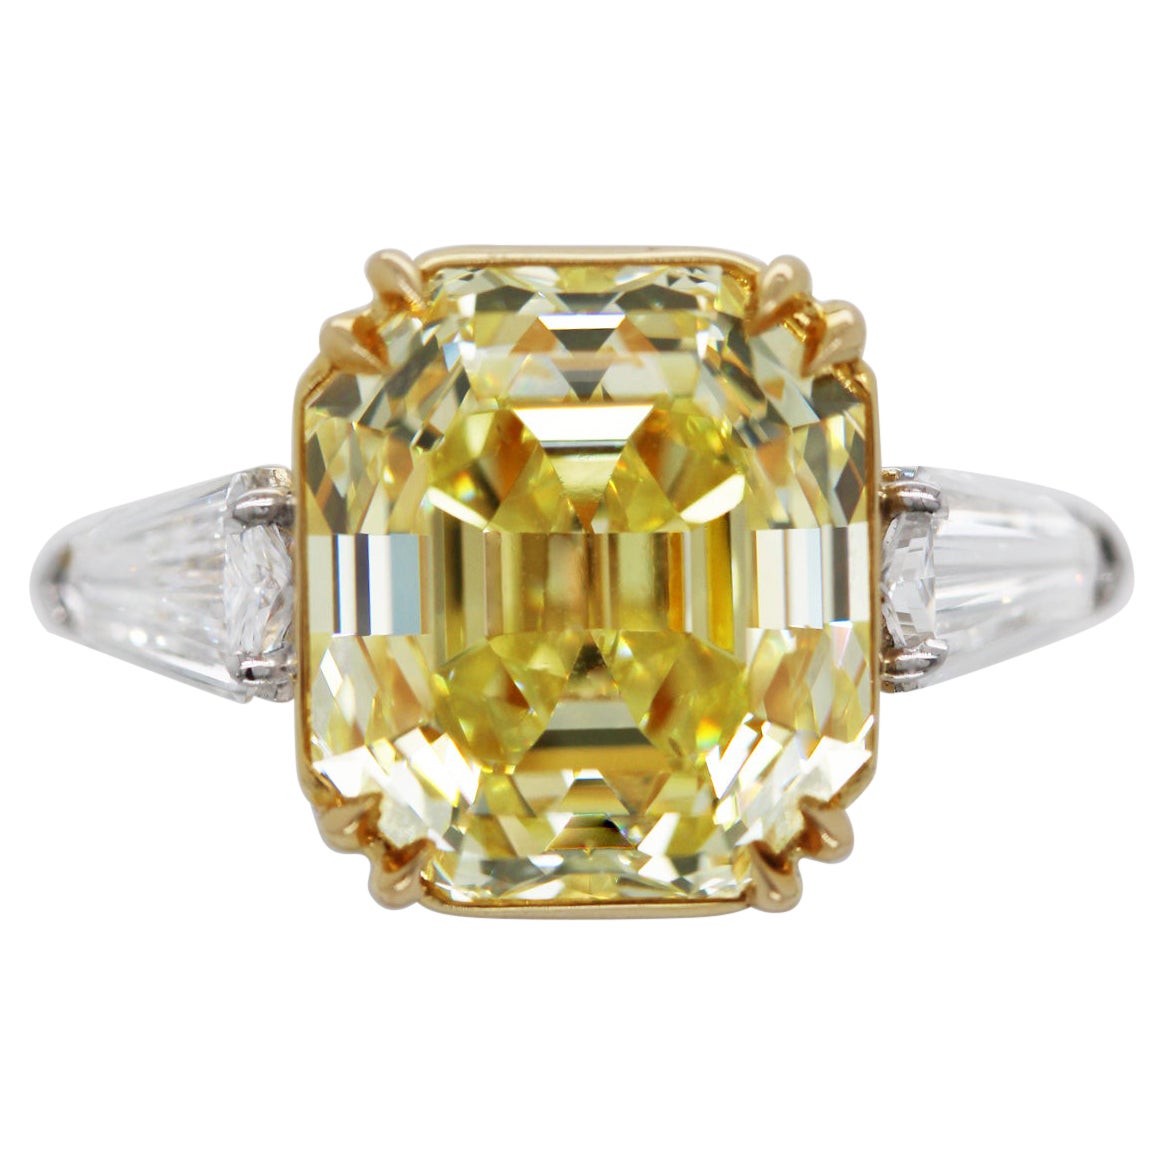 11.71 Ct IF Intense Yellow Emerald Cut Diamond Engagement Ring GIA Scarselli For Sale